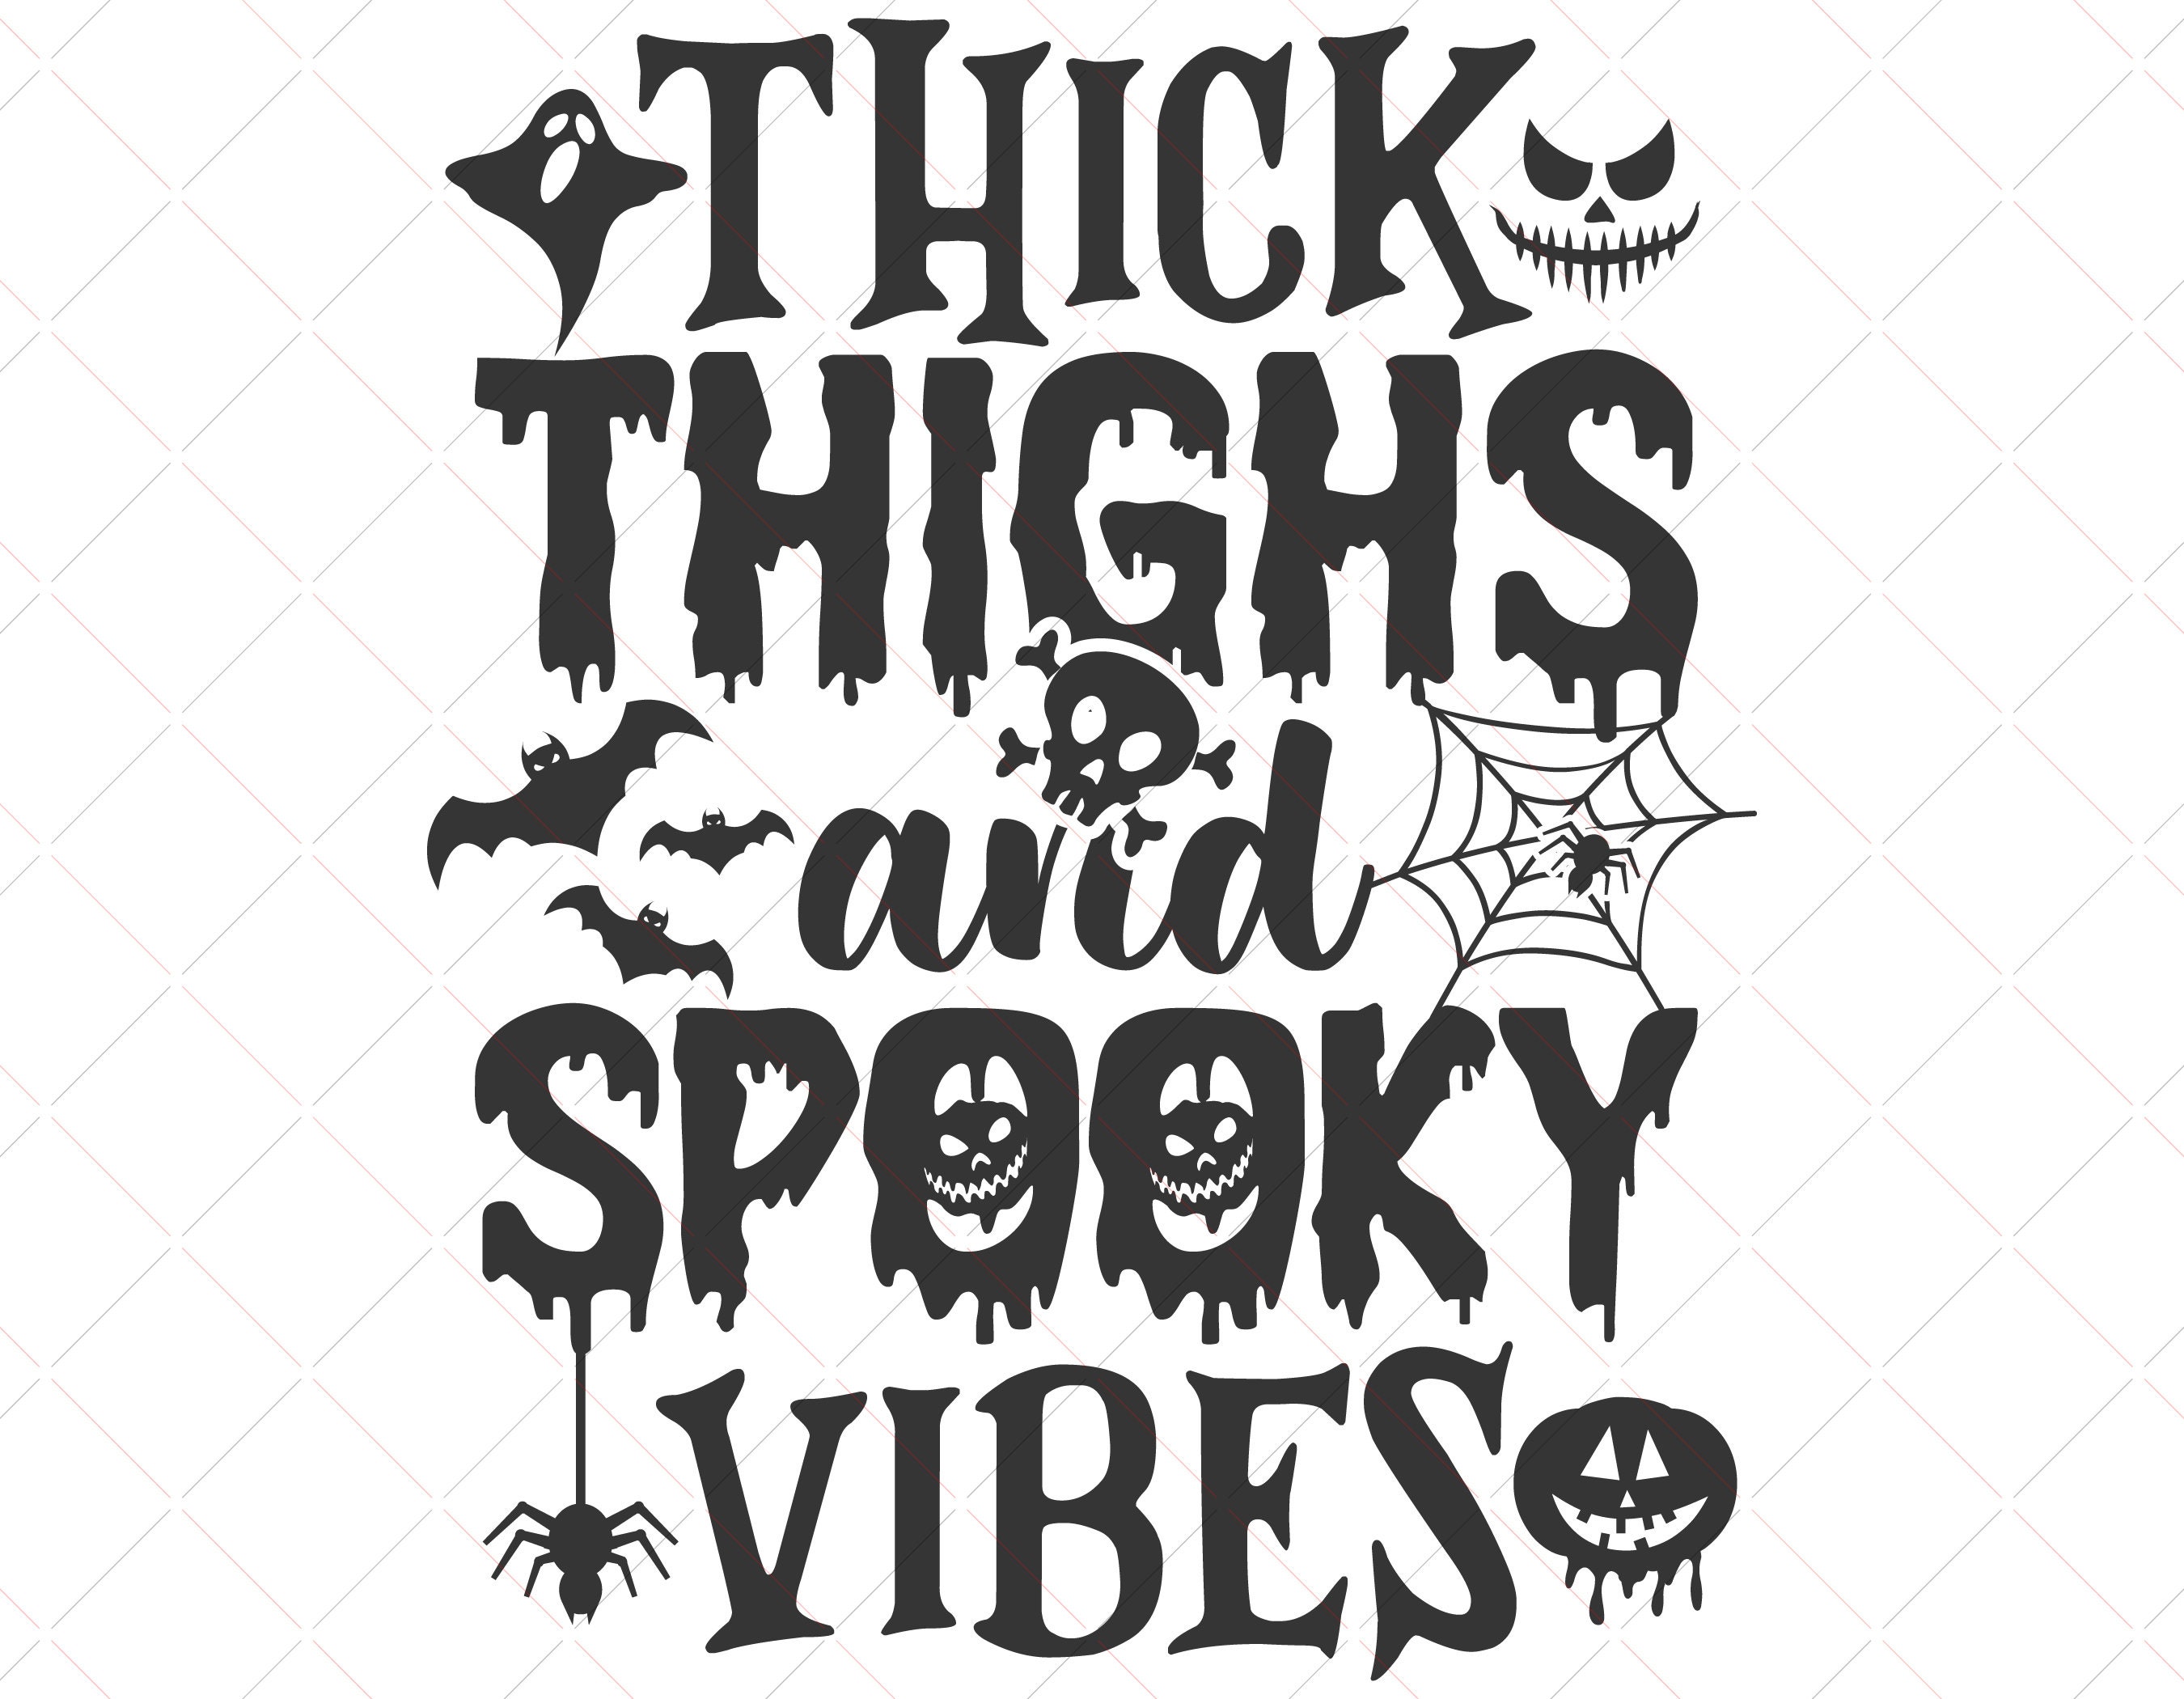 Thick thighs and spooky vibes svg Halloween quote svg | Etsy